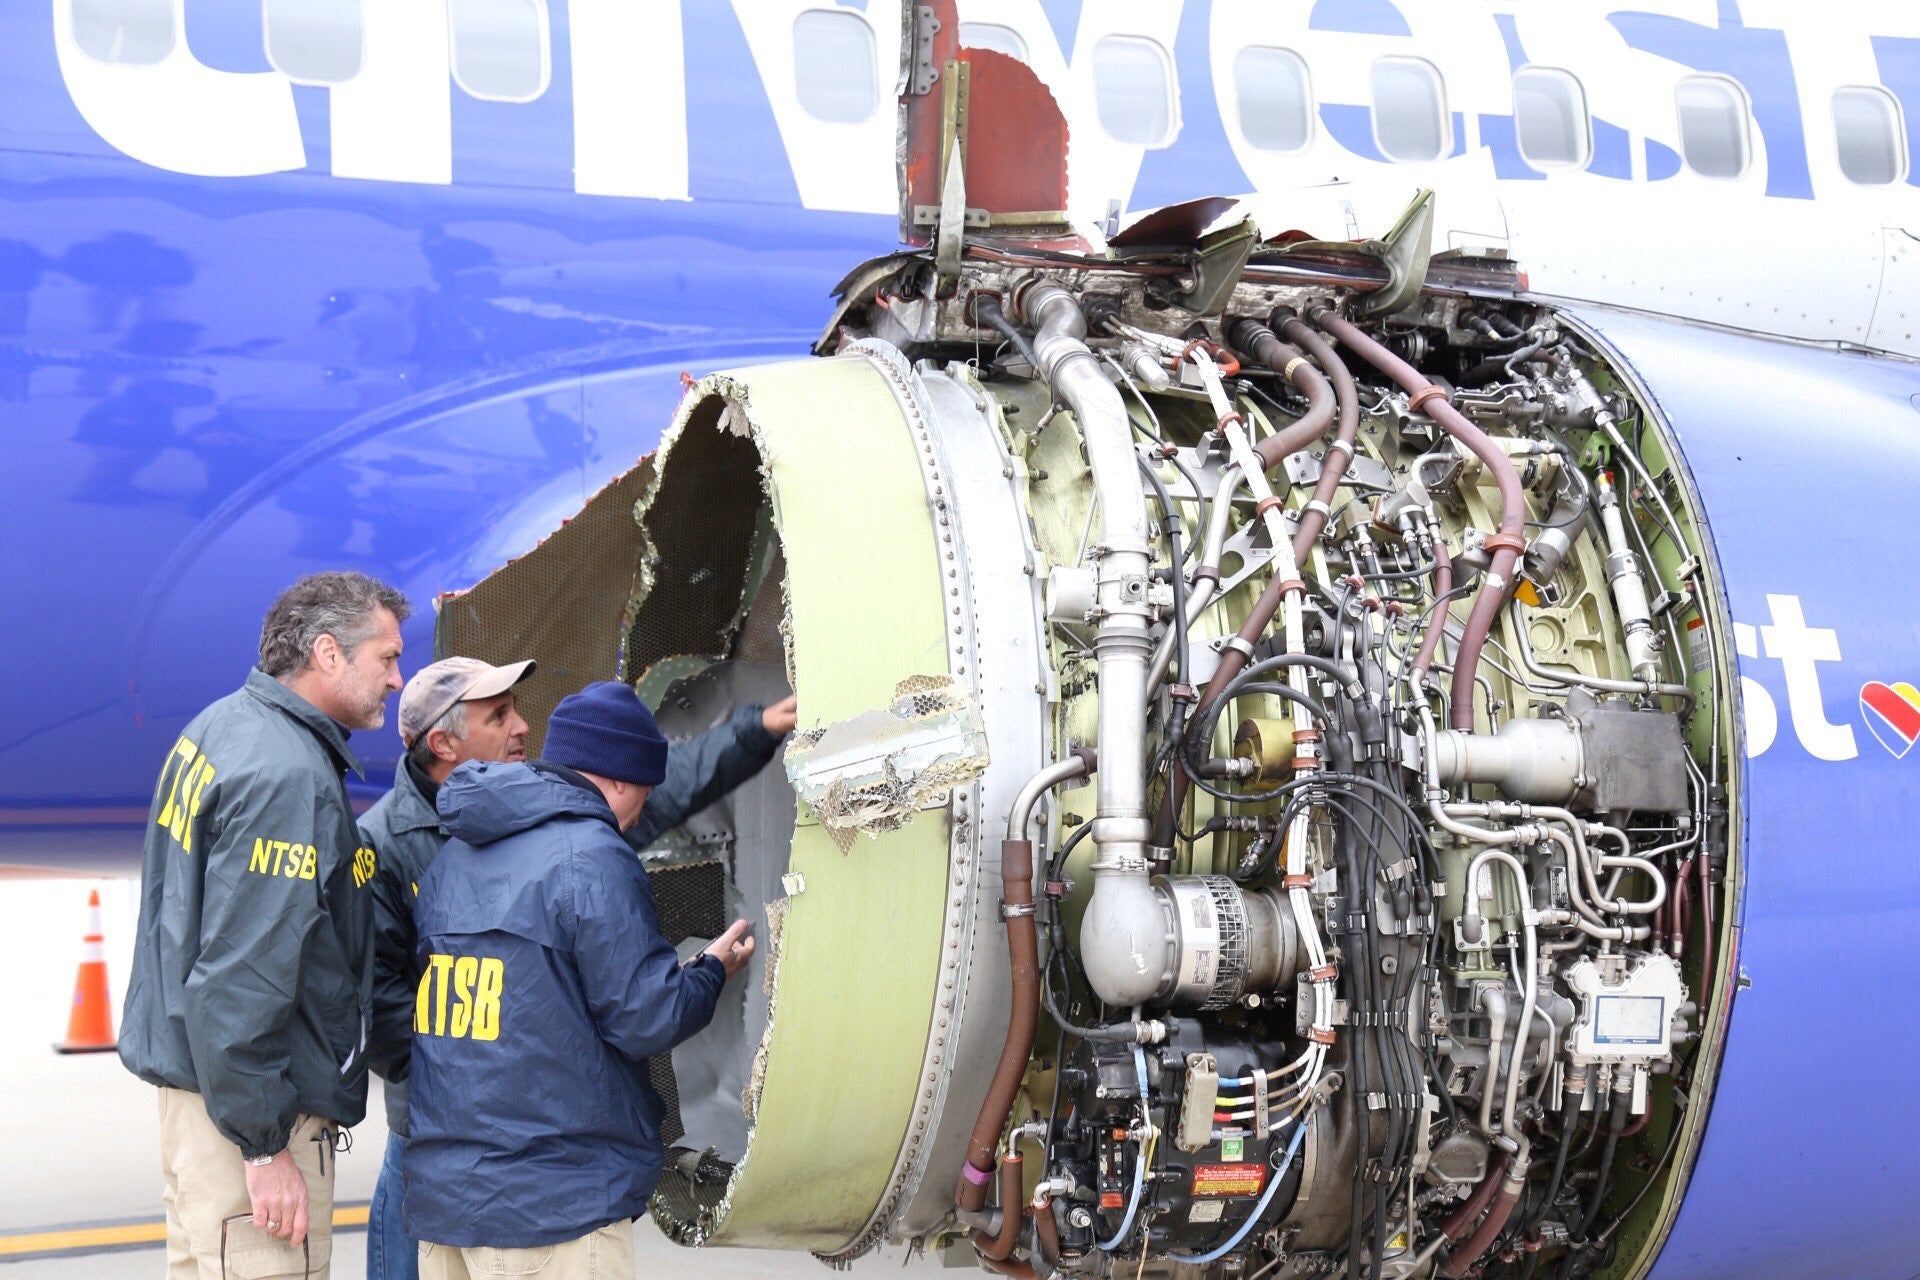 The plane's damaged and exposed left engine.